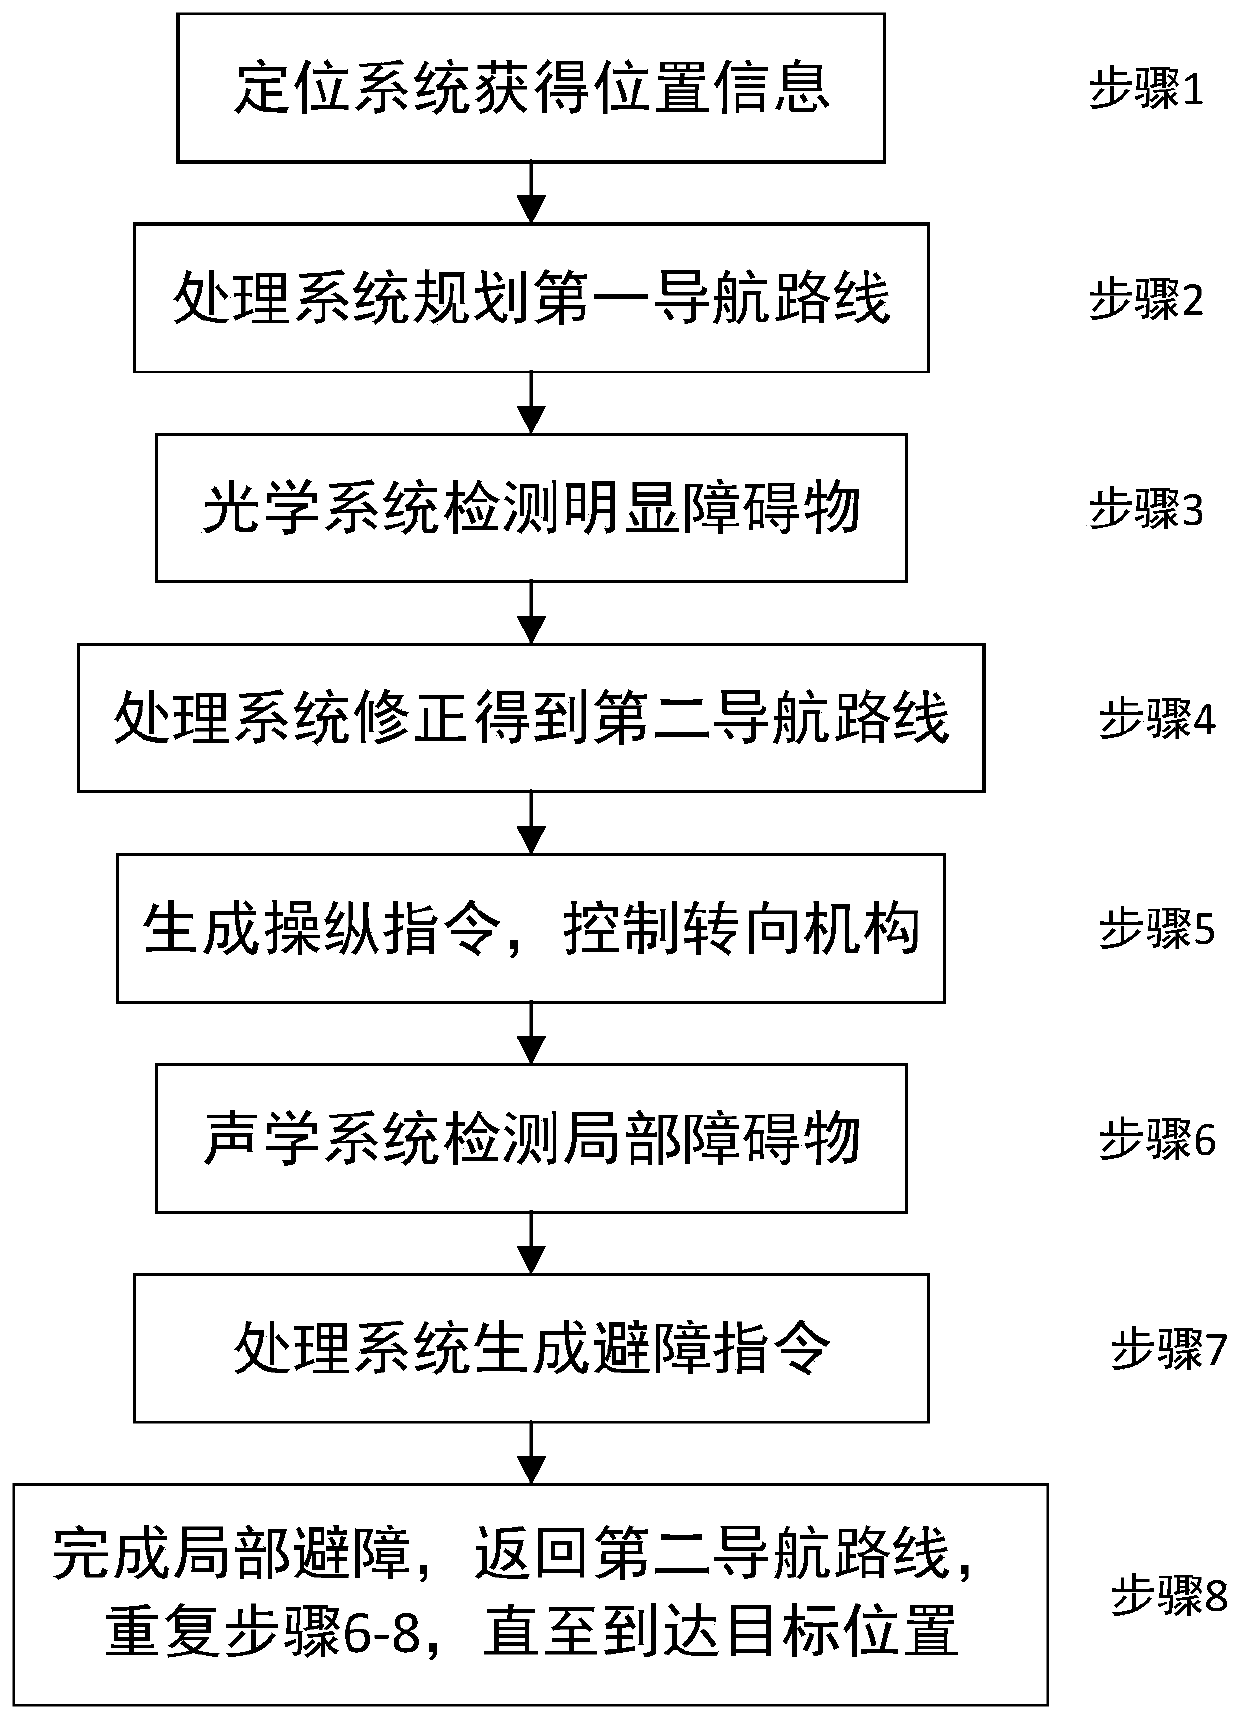 Carrying tool navigation system, method and equipment based on optical and acoustic systems and readable storage medium